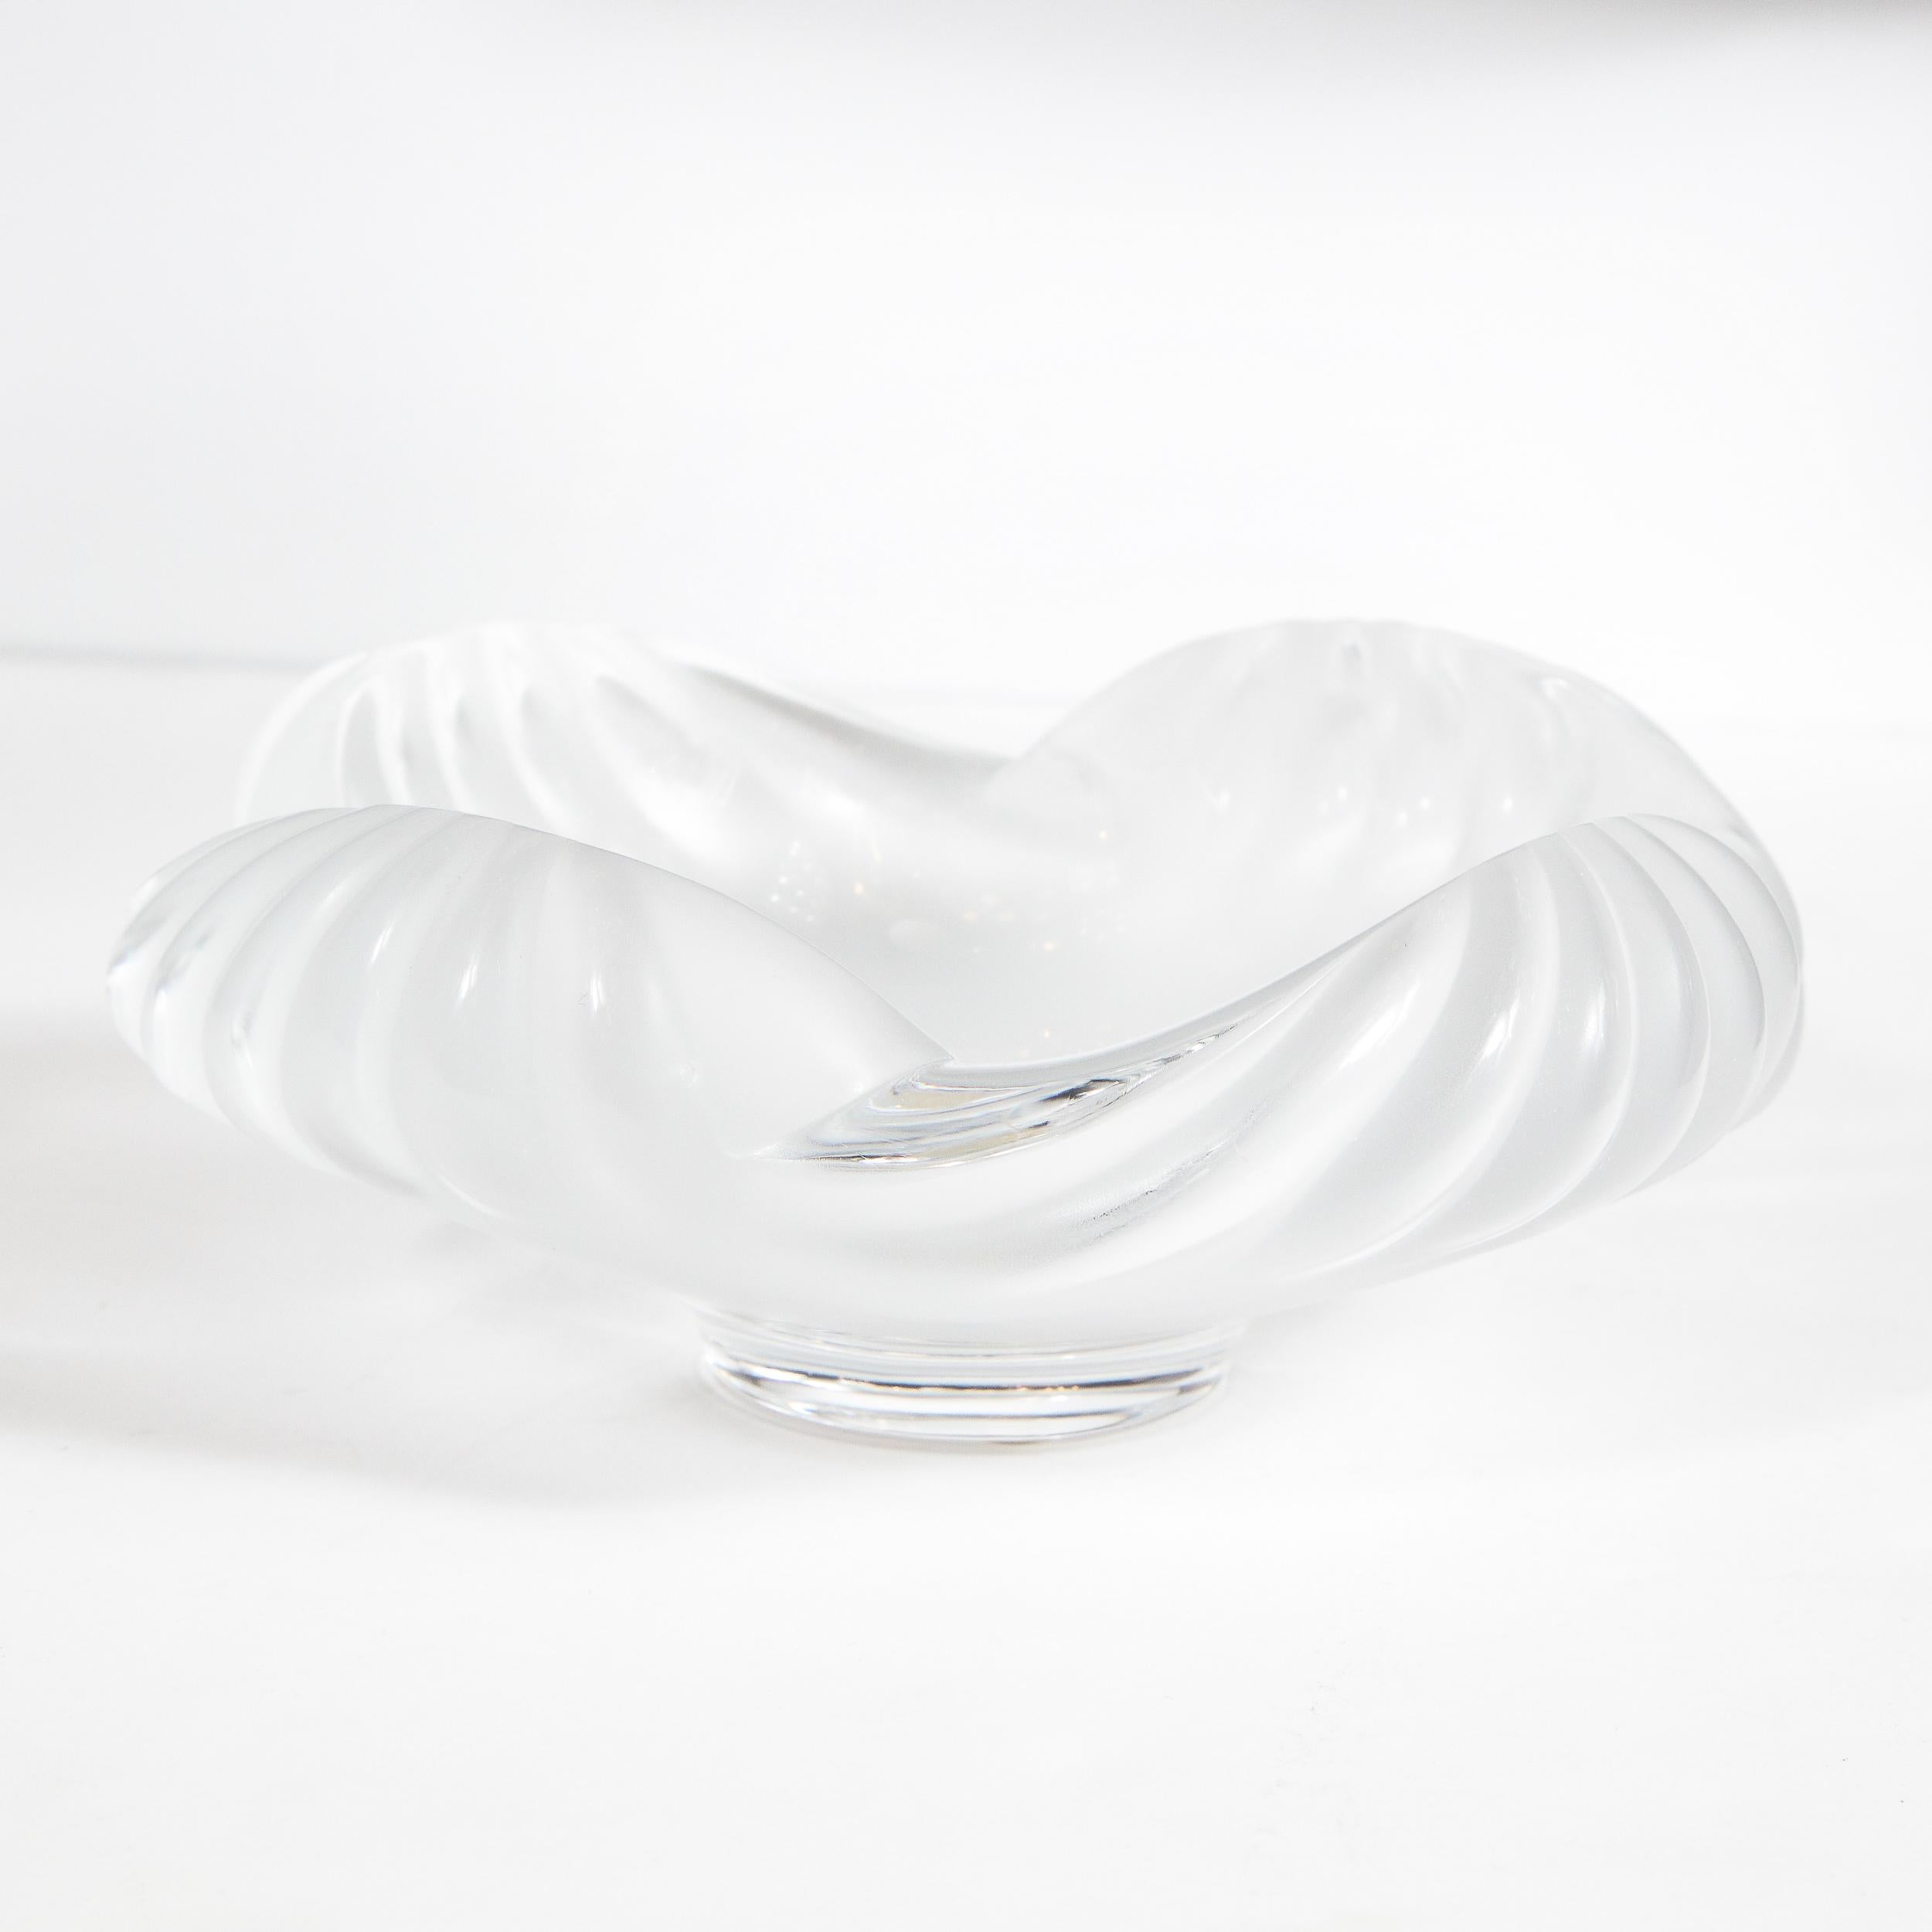 20th Century Modernist Translucent and Frosted Channeled Crystal Bowl Signed Lalique For Sale